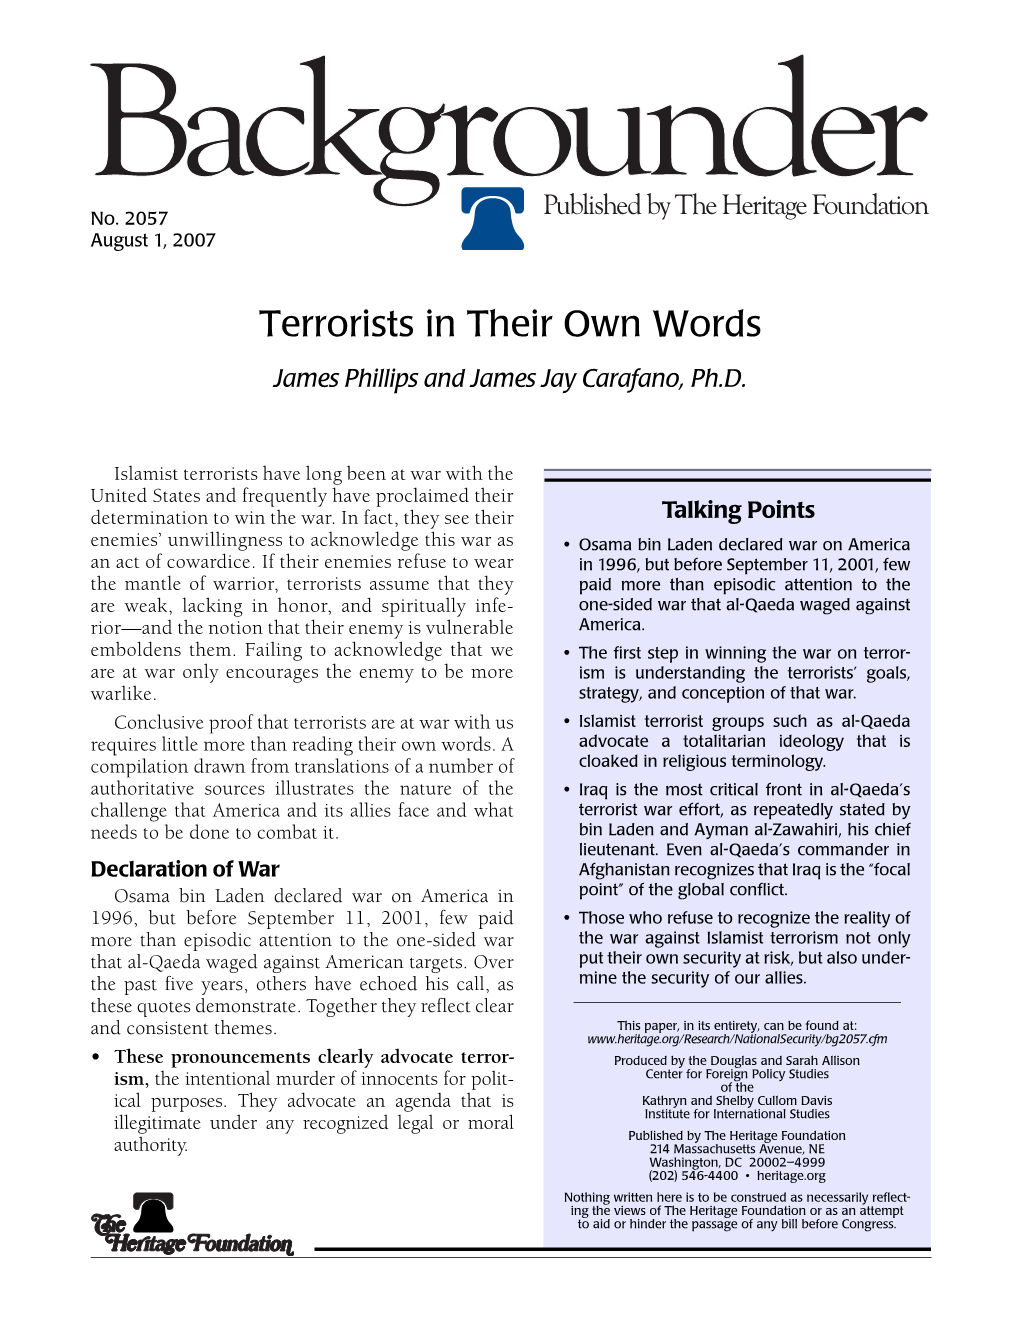 Terrorists in Their Own Words James Phillips and James Jay Carafano, Ph.D